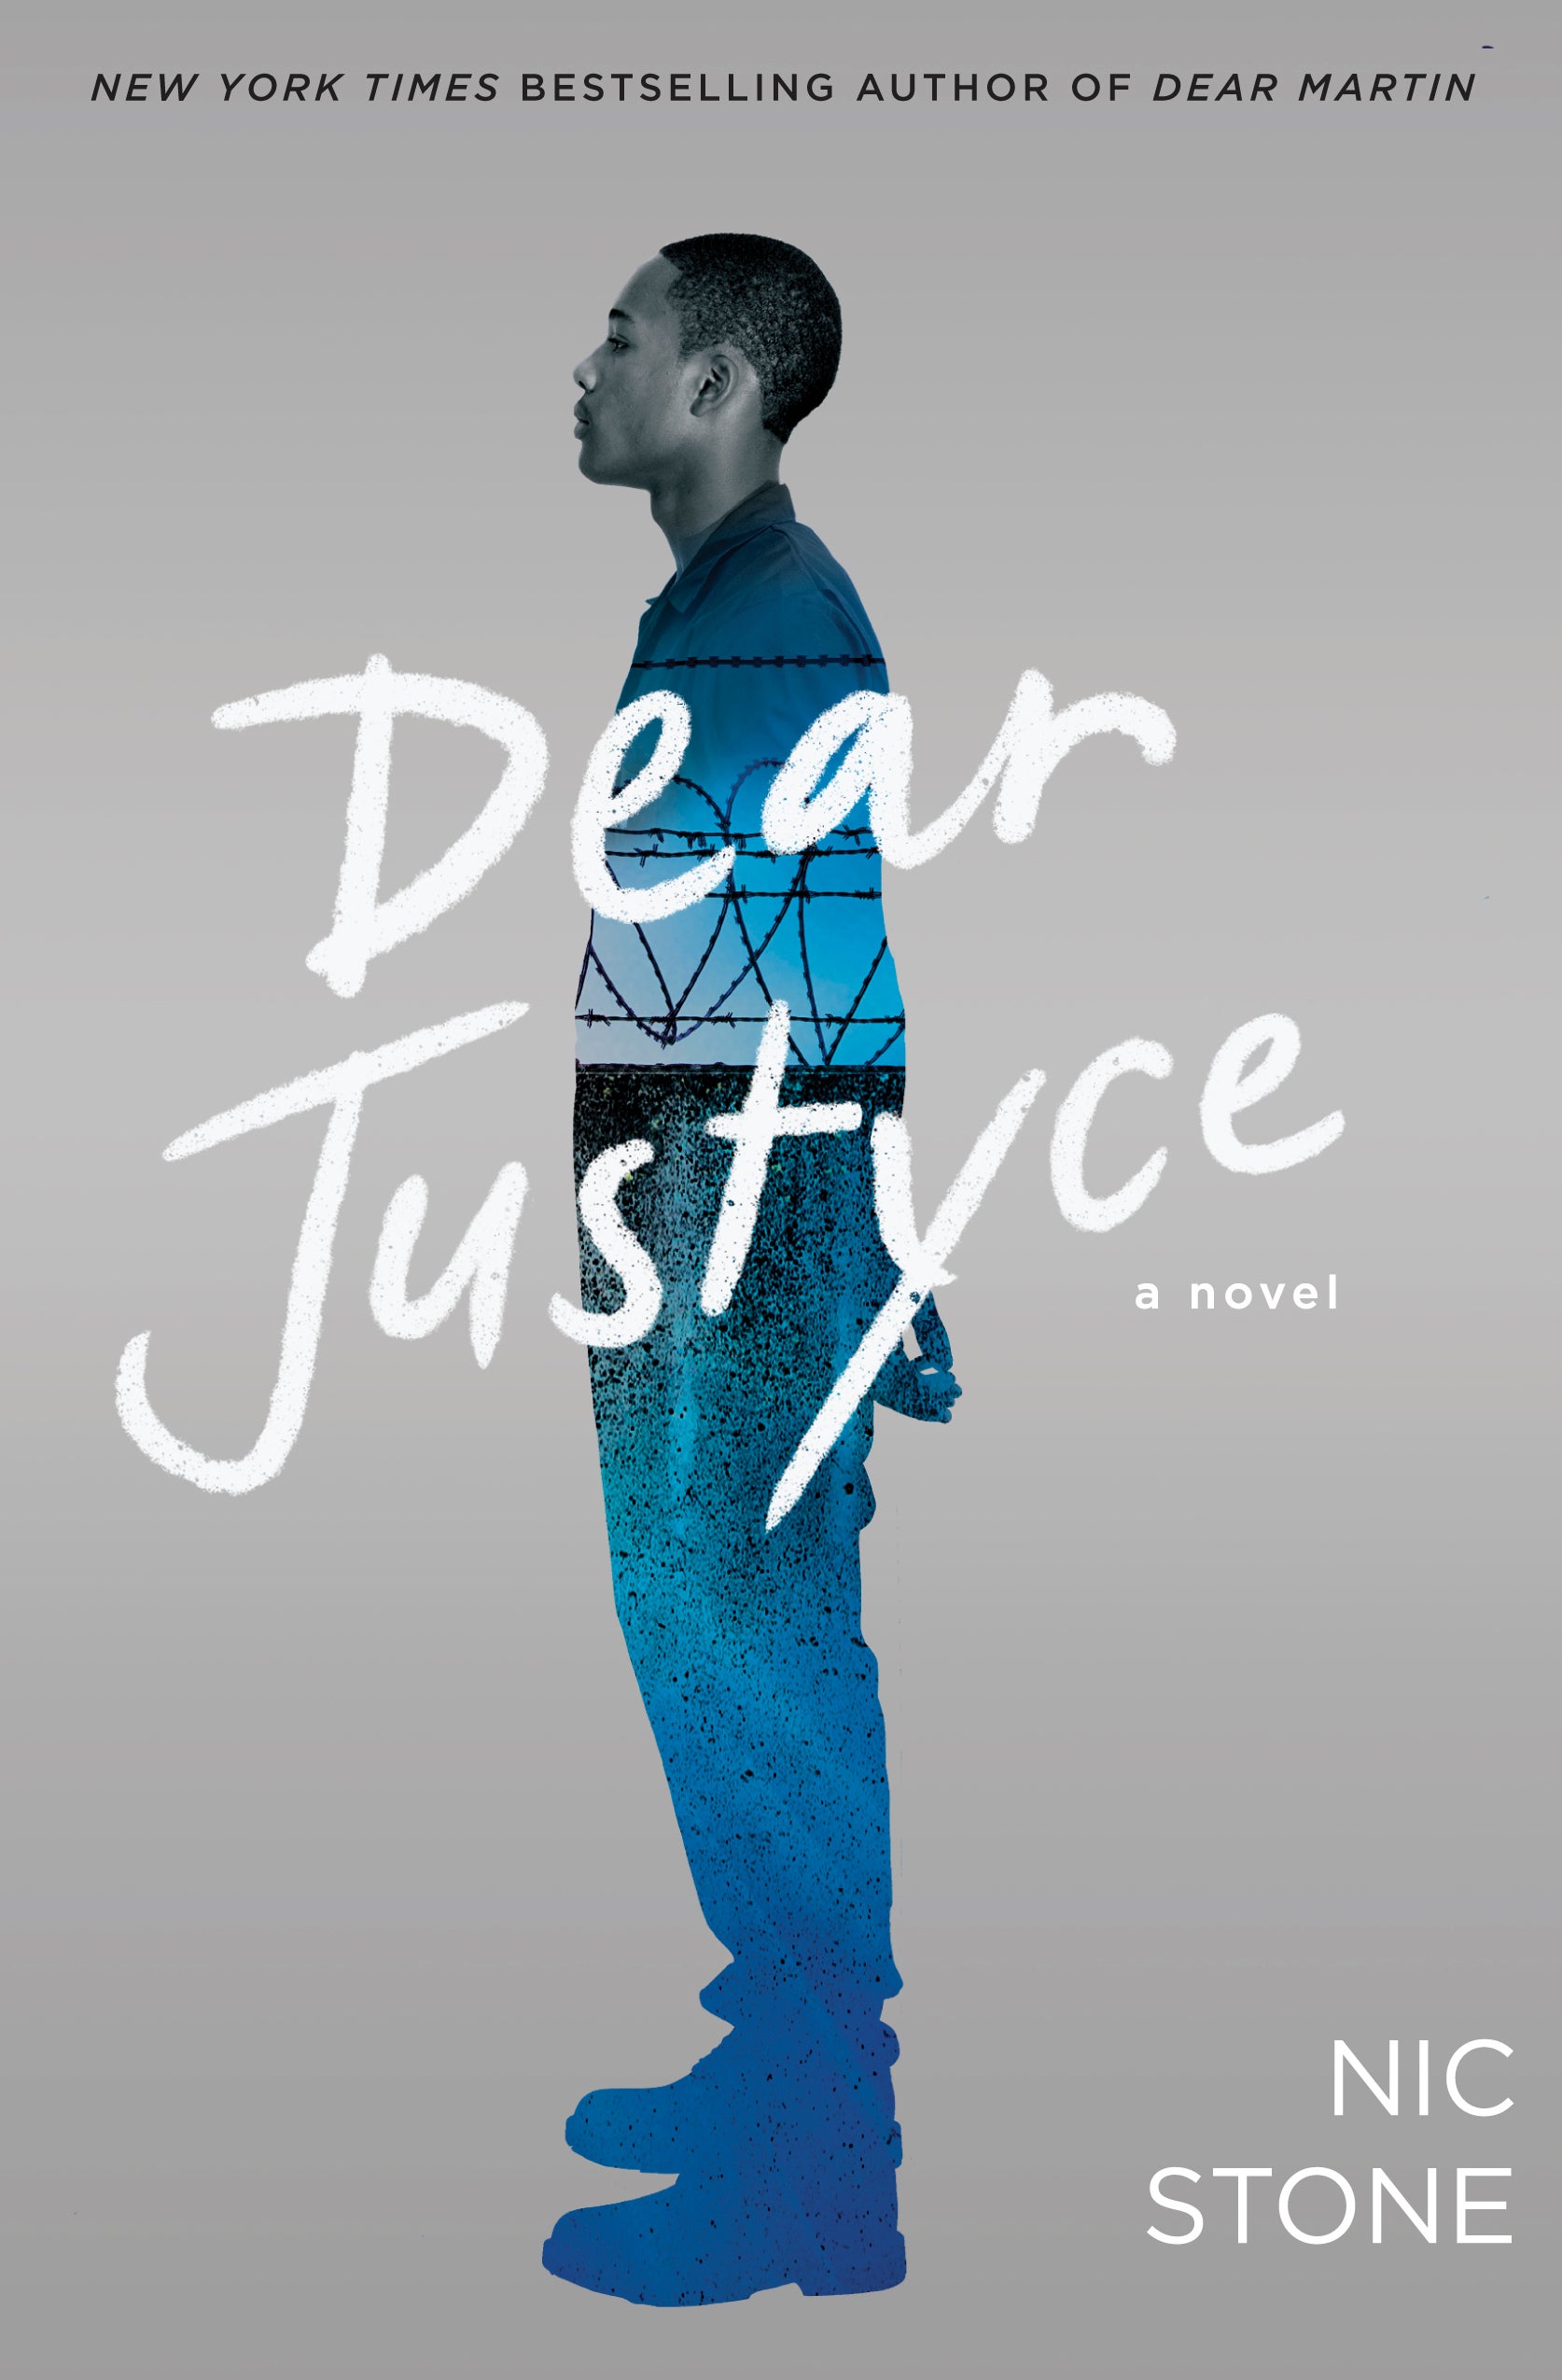 See The Book Cover For Nic Stone’s Latest Young Adult Novel ‘Dear Justyce’